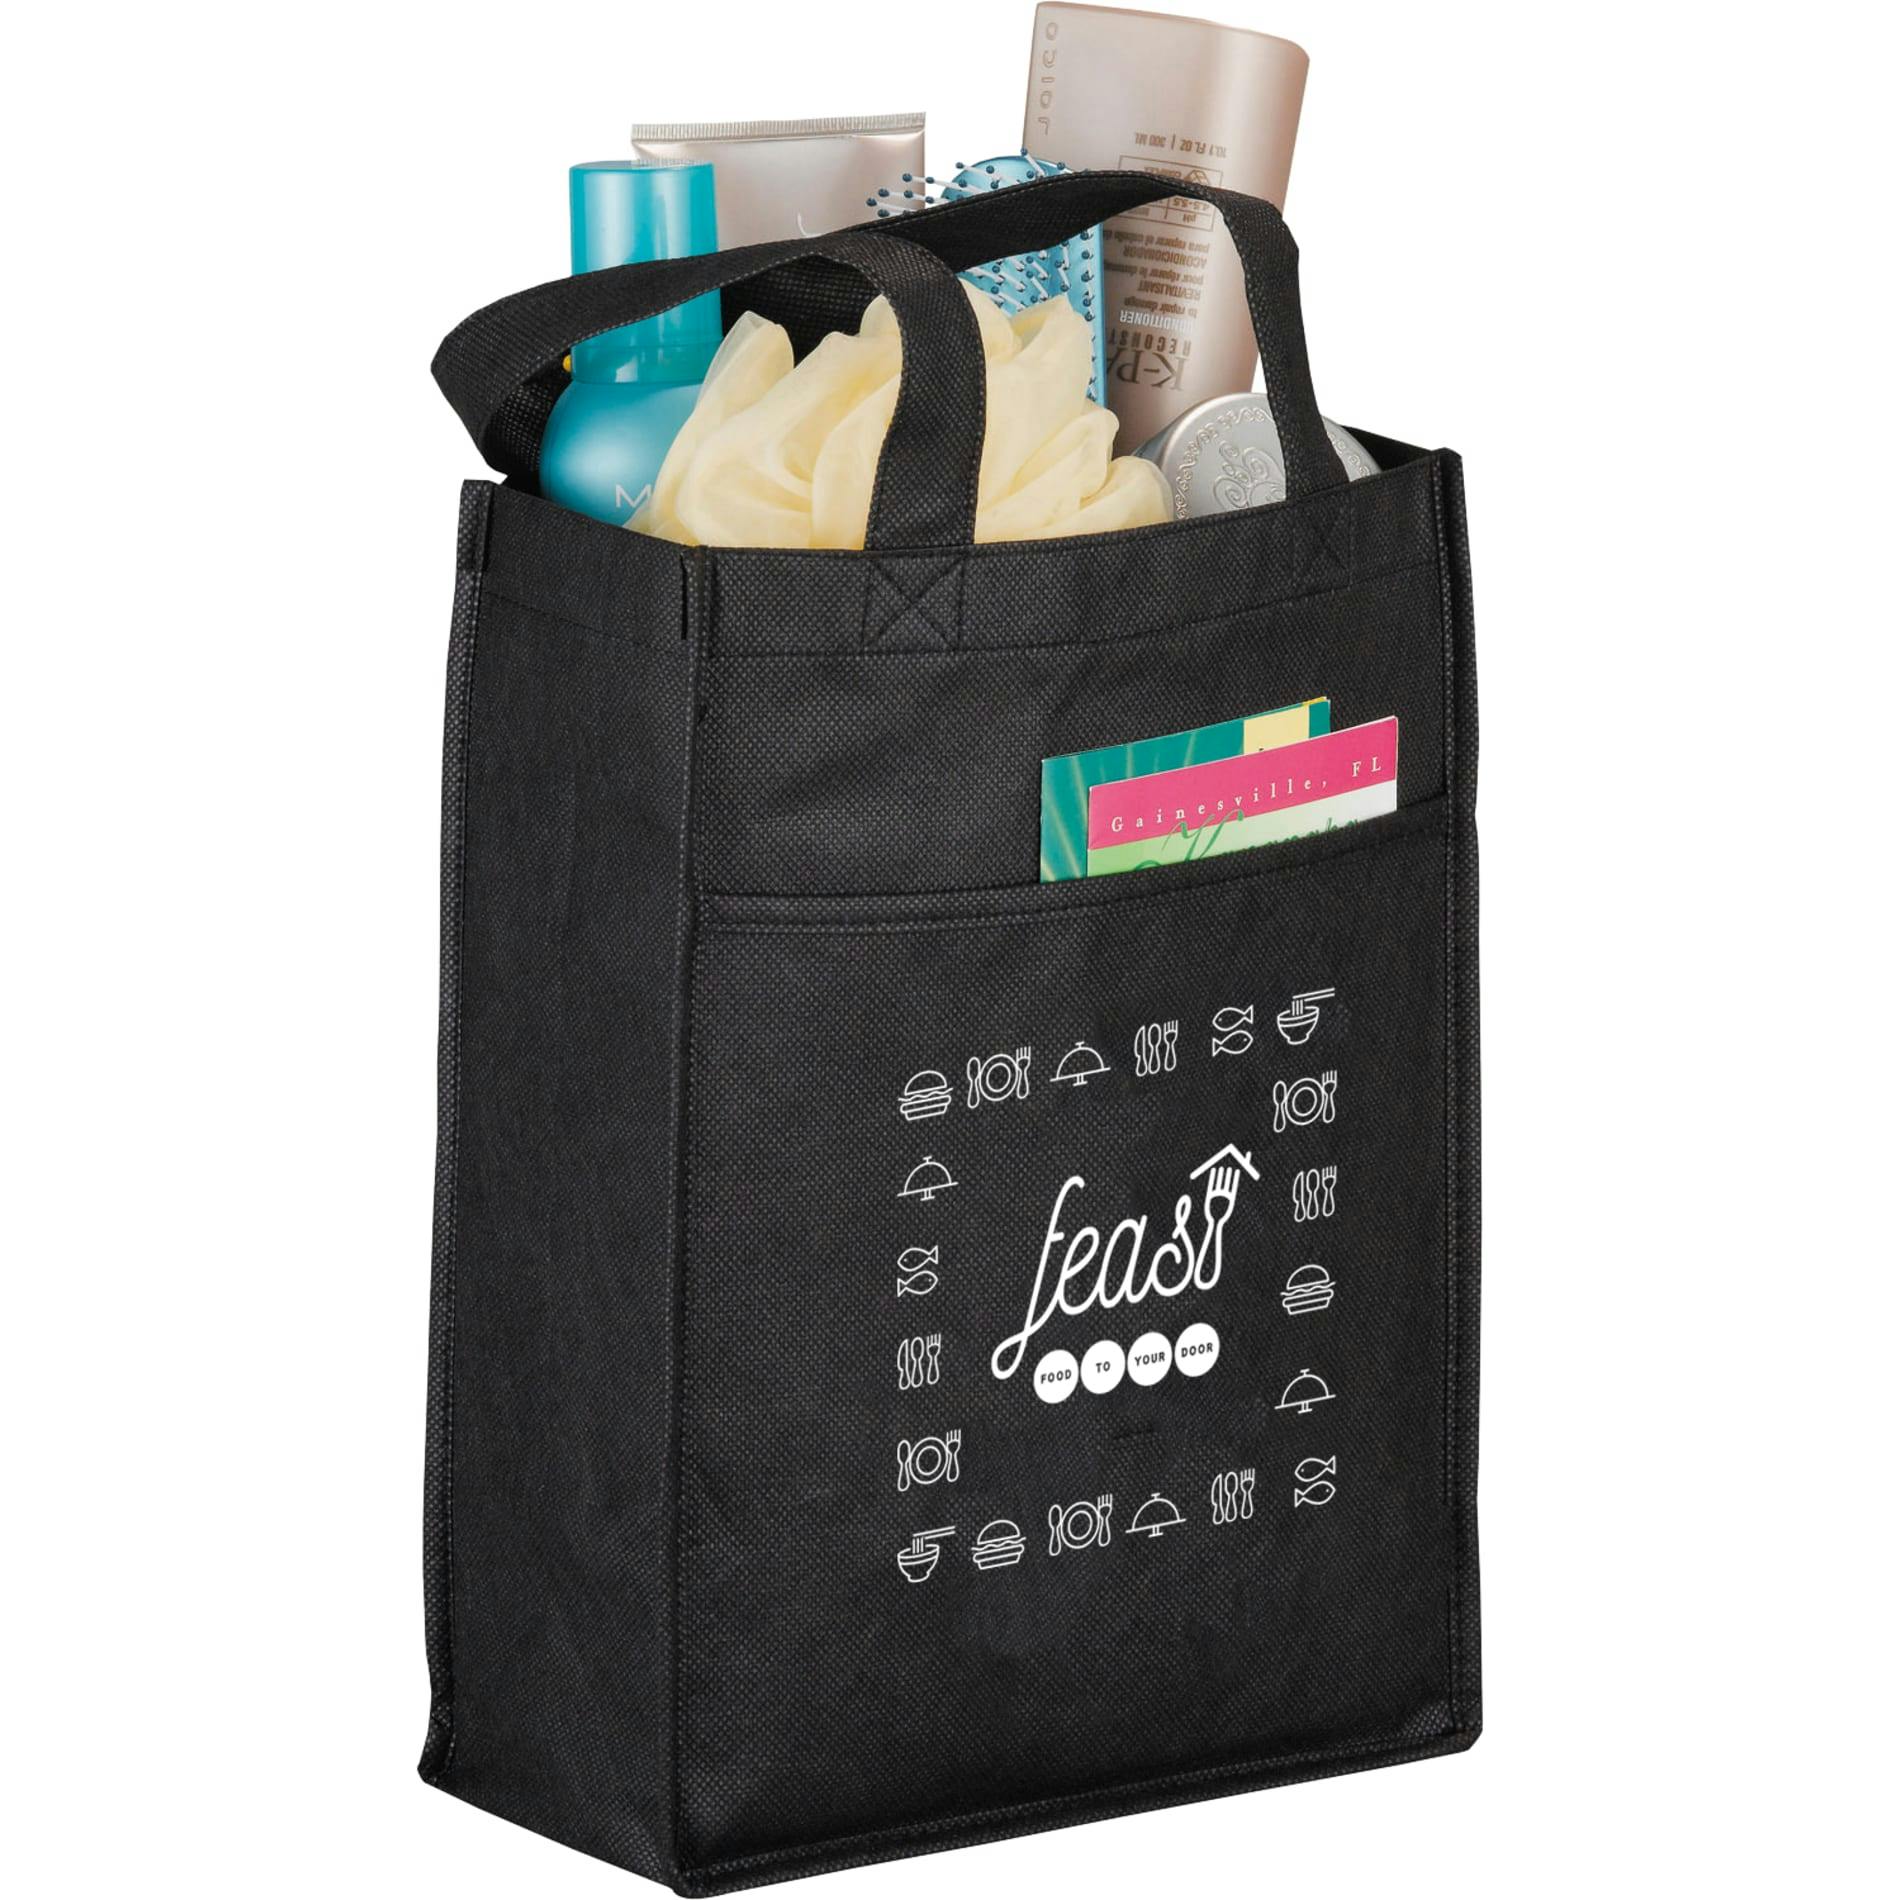 Non-Woven Gift Tote with Pocket - additional Image 1